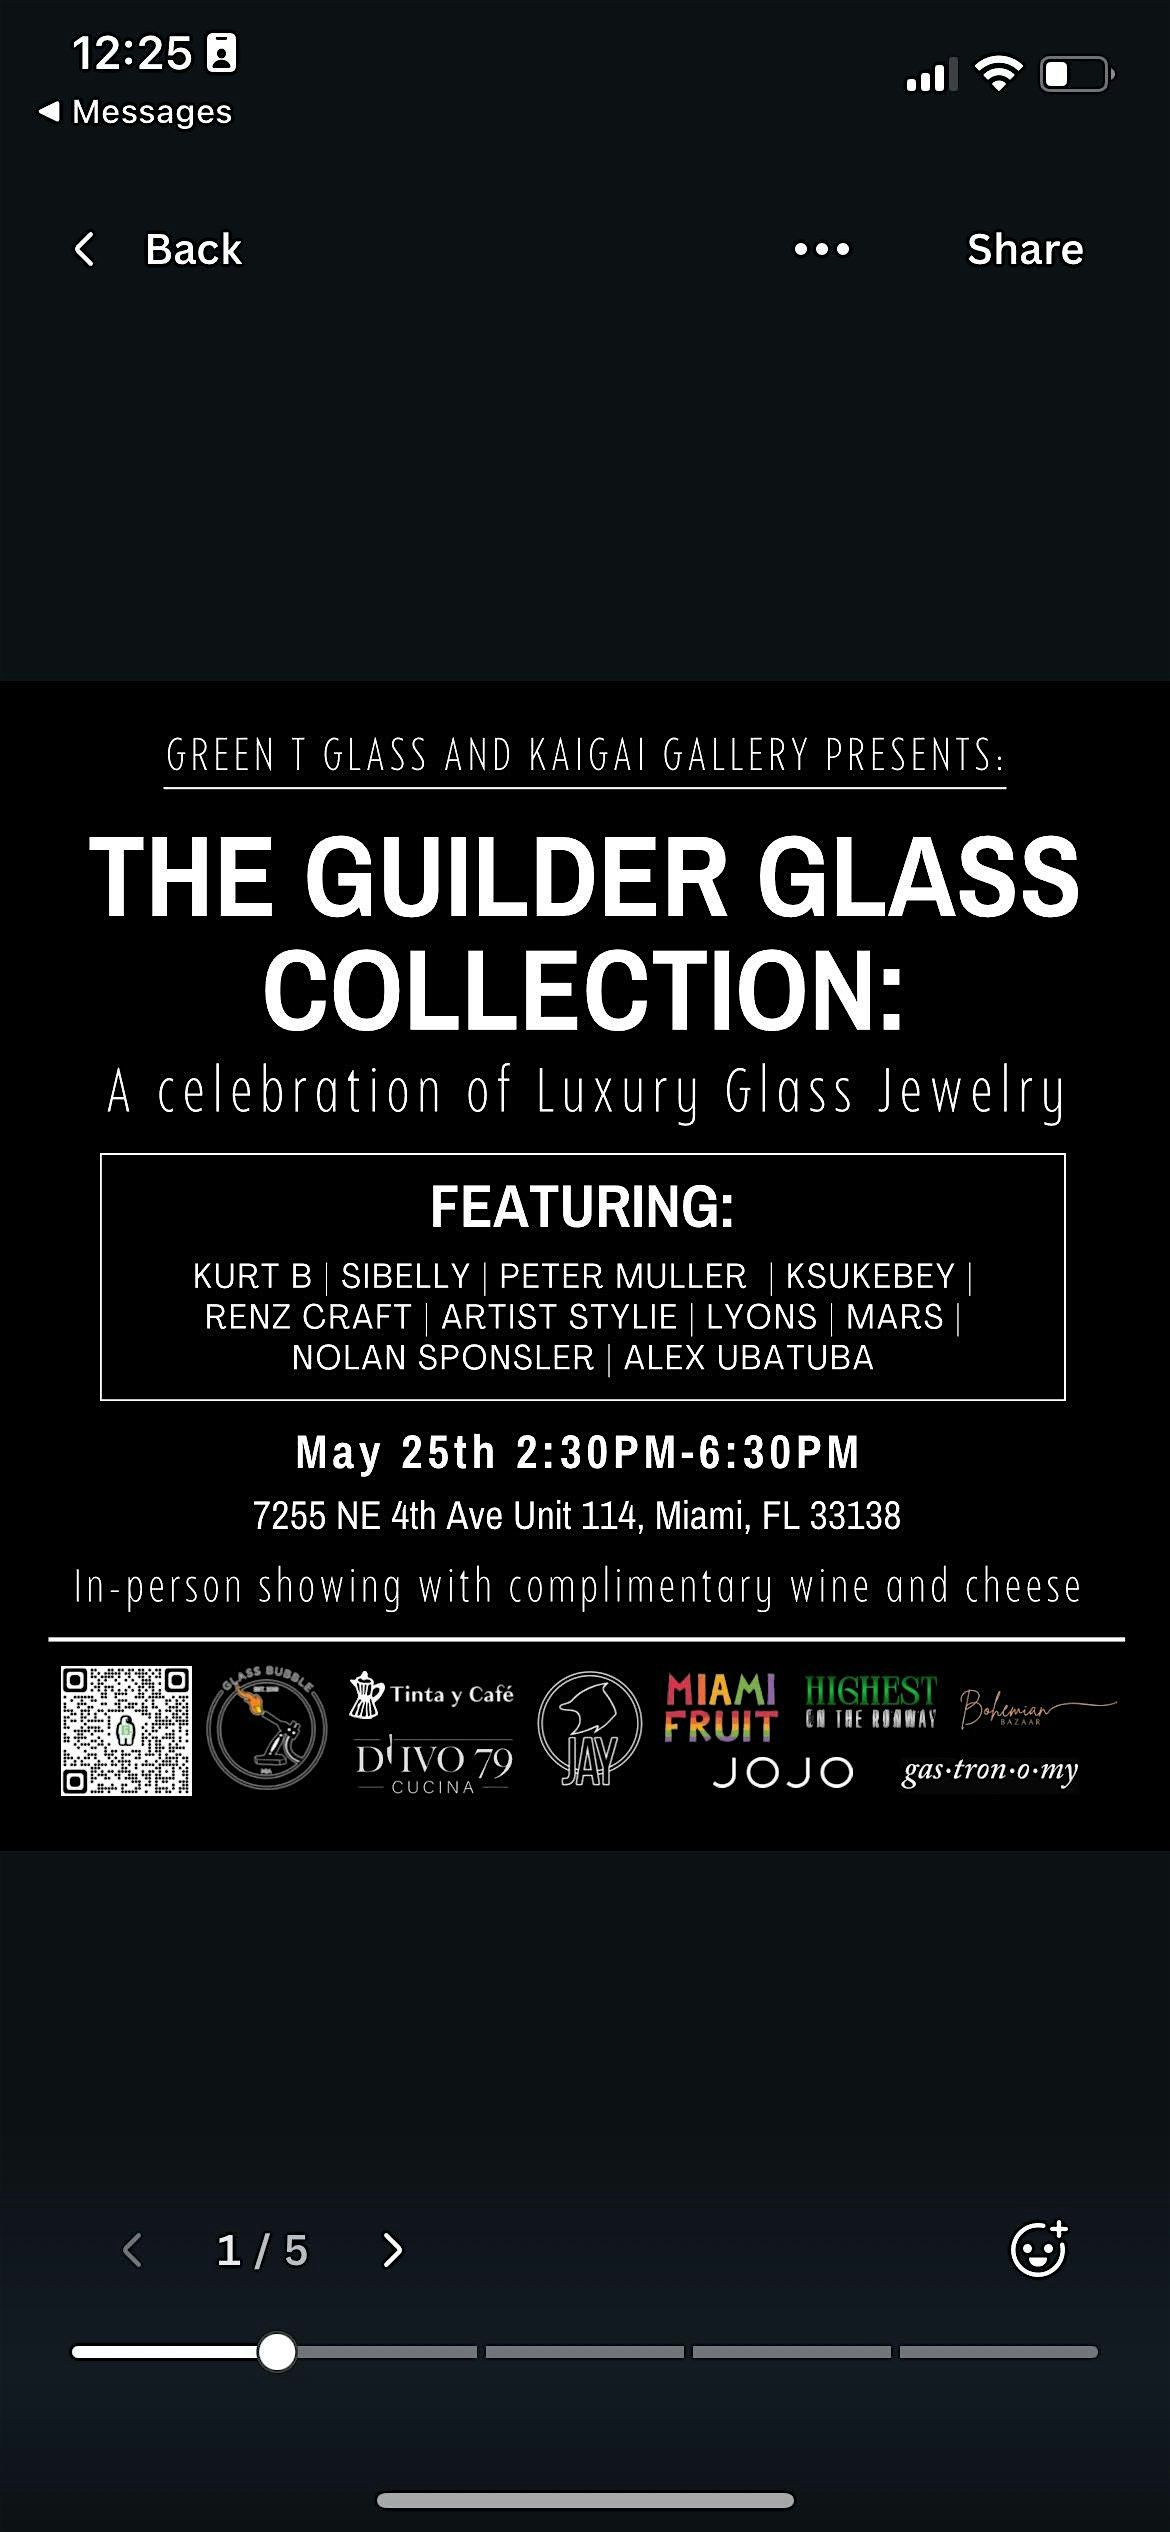 The Guilder's Glass Collection: A Celebration of Luxury Glass Jewelry